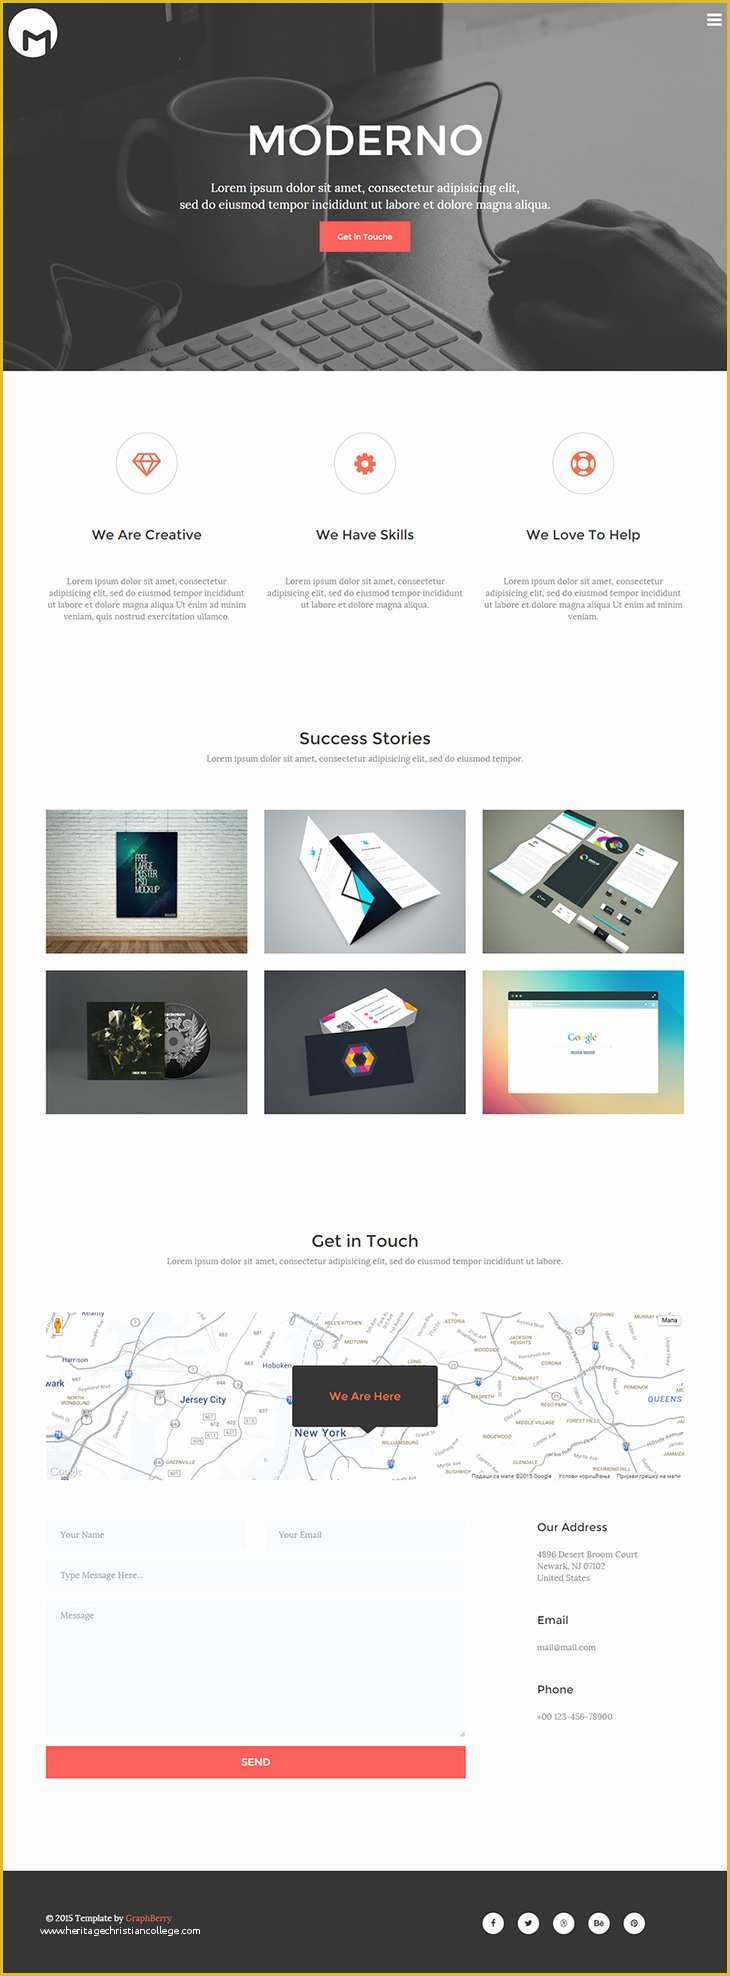 Free HTML5 Responsive Templates Of Moderno Free HTML5 Responsive Template Graphberry